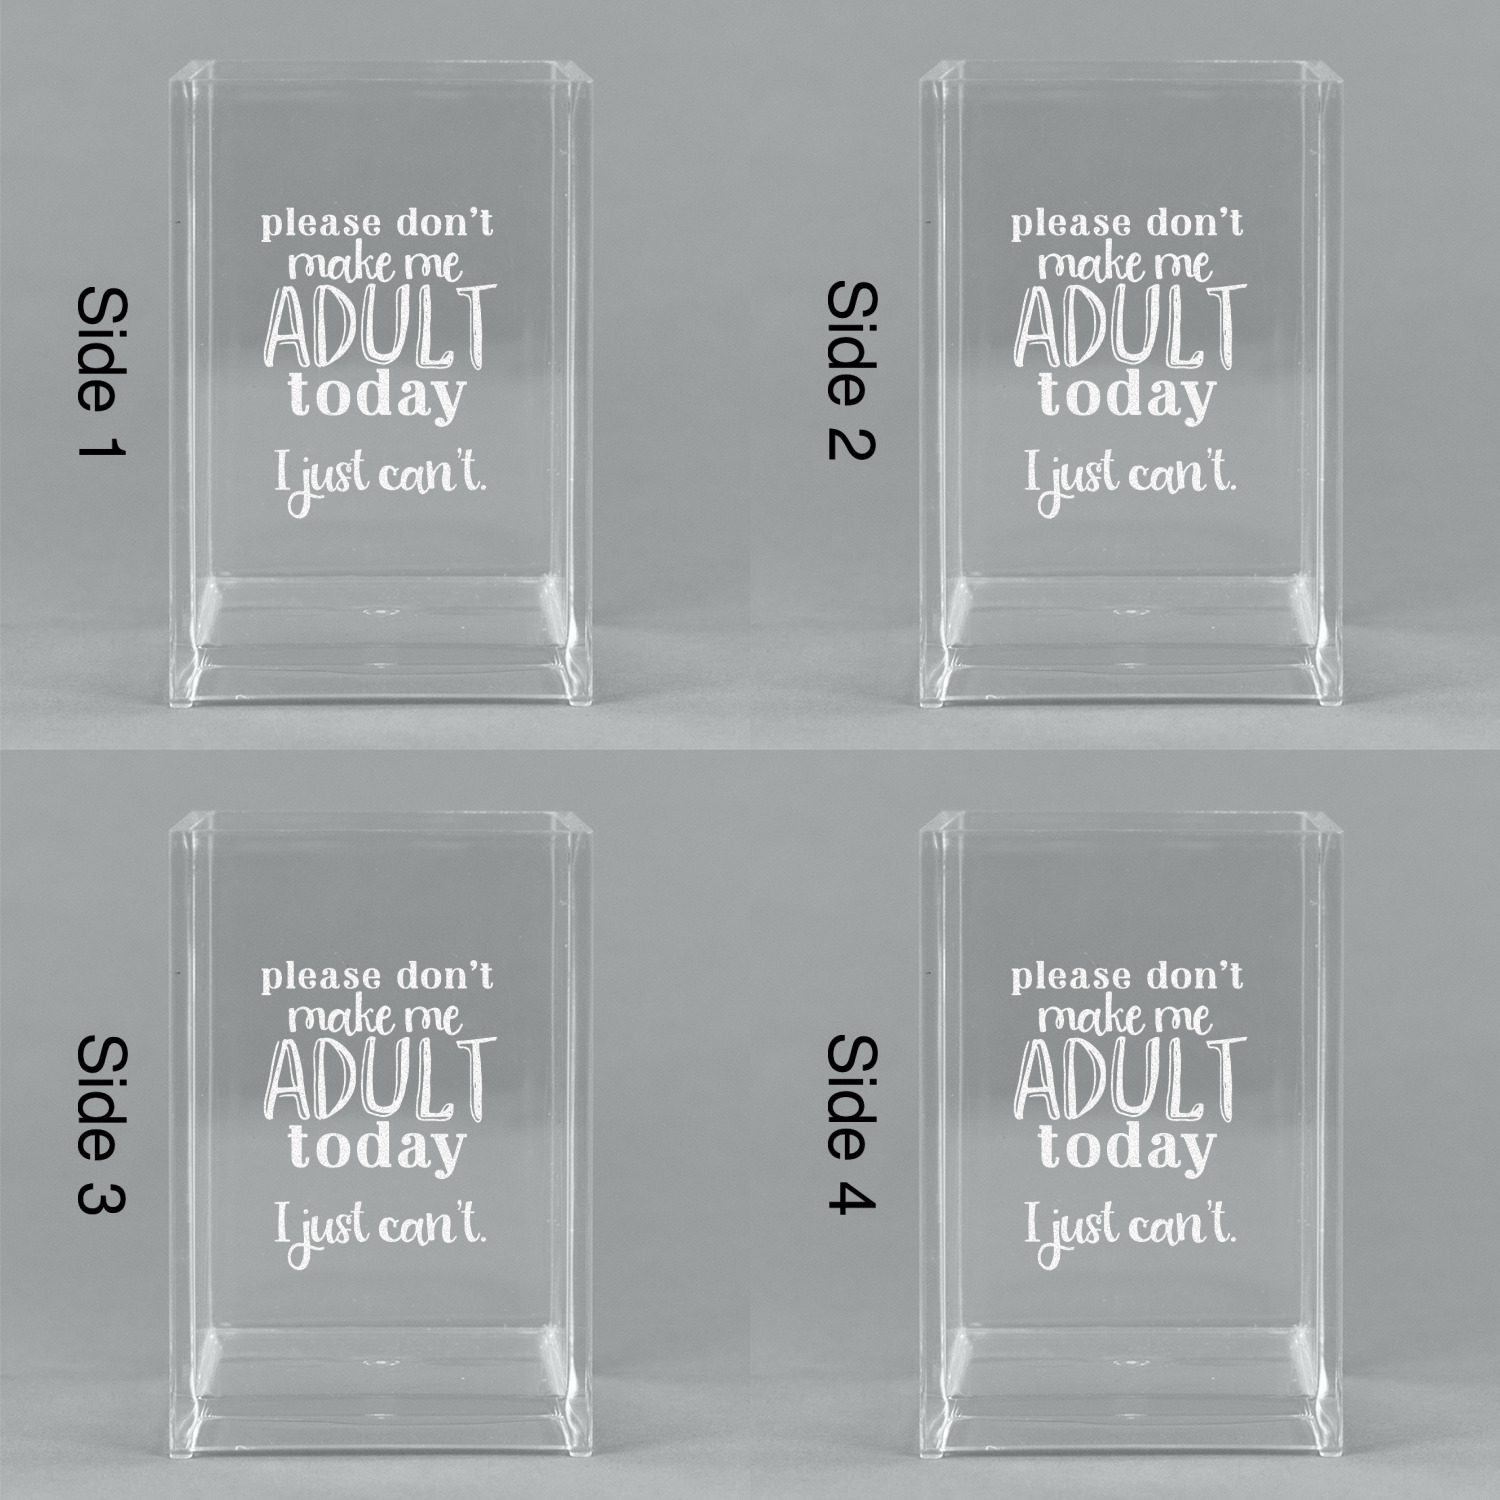 https://www.youcustomizeit.com/common/MAKE/1038321/Funny-Quotes-and-Sayings-Acrylic-Pen-Holder-All-Sides.jpg?lm=1679500079